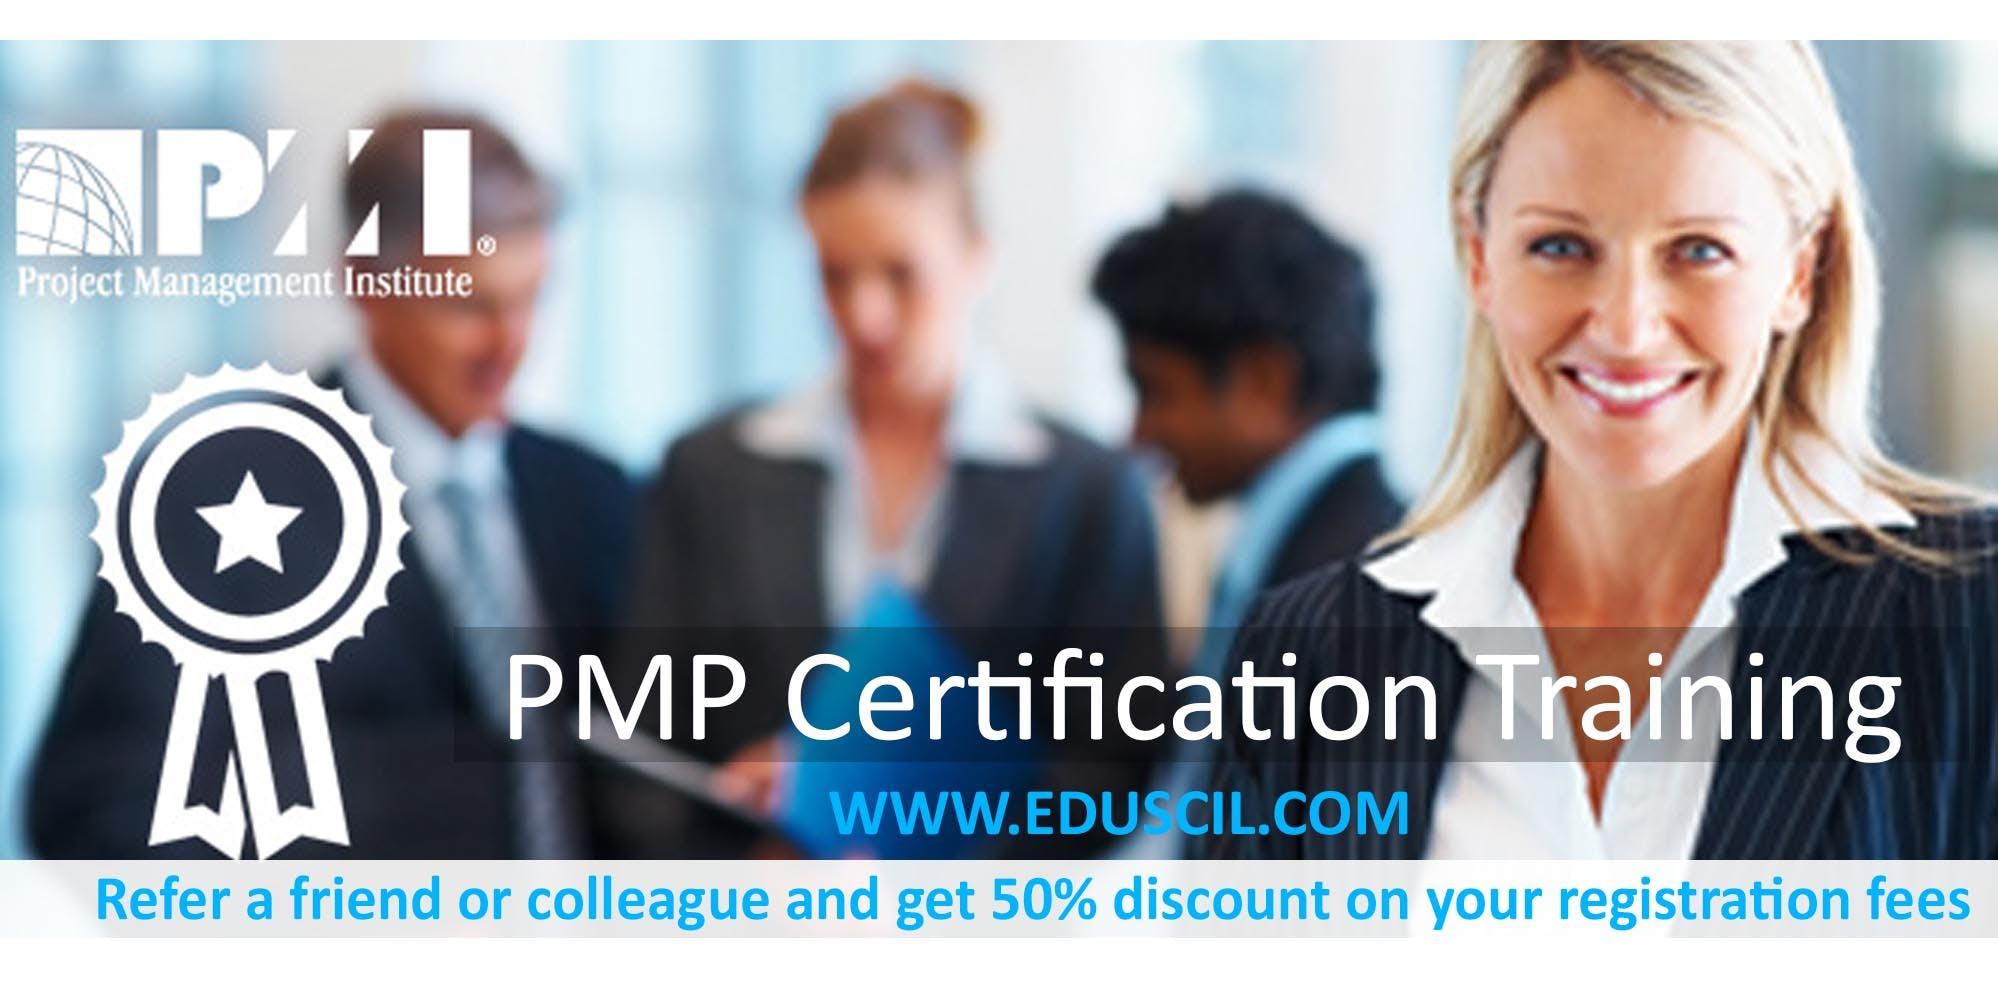 Project Management Professional (PMP) Boot Camp in Simi Valley, CA-USA|Eduscil